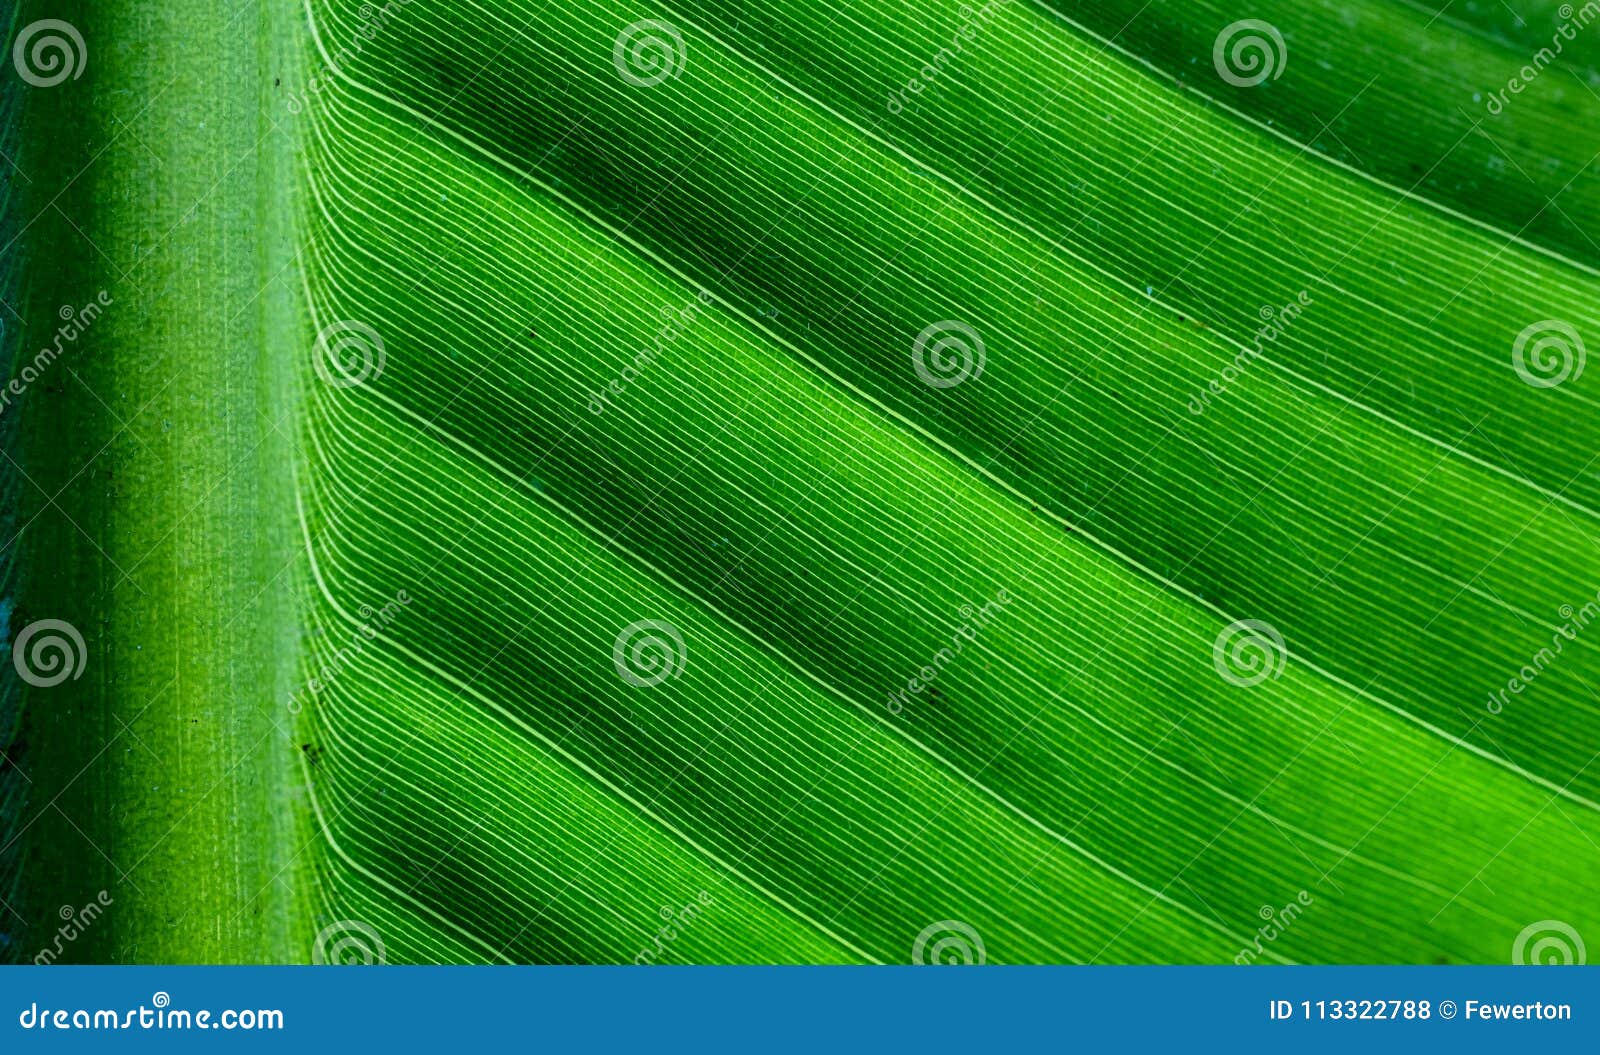 backlit close up details of fresh banana leaf structure with midrib perpendicular to the frame eco green background texture